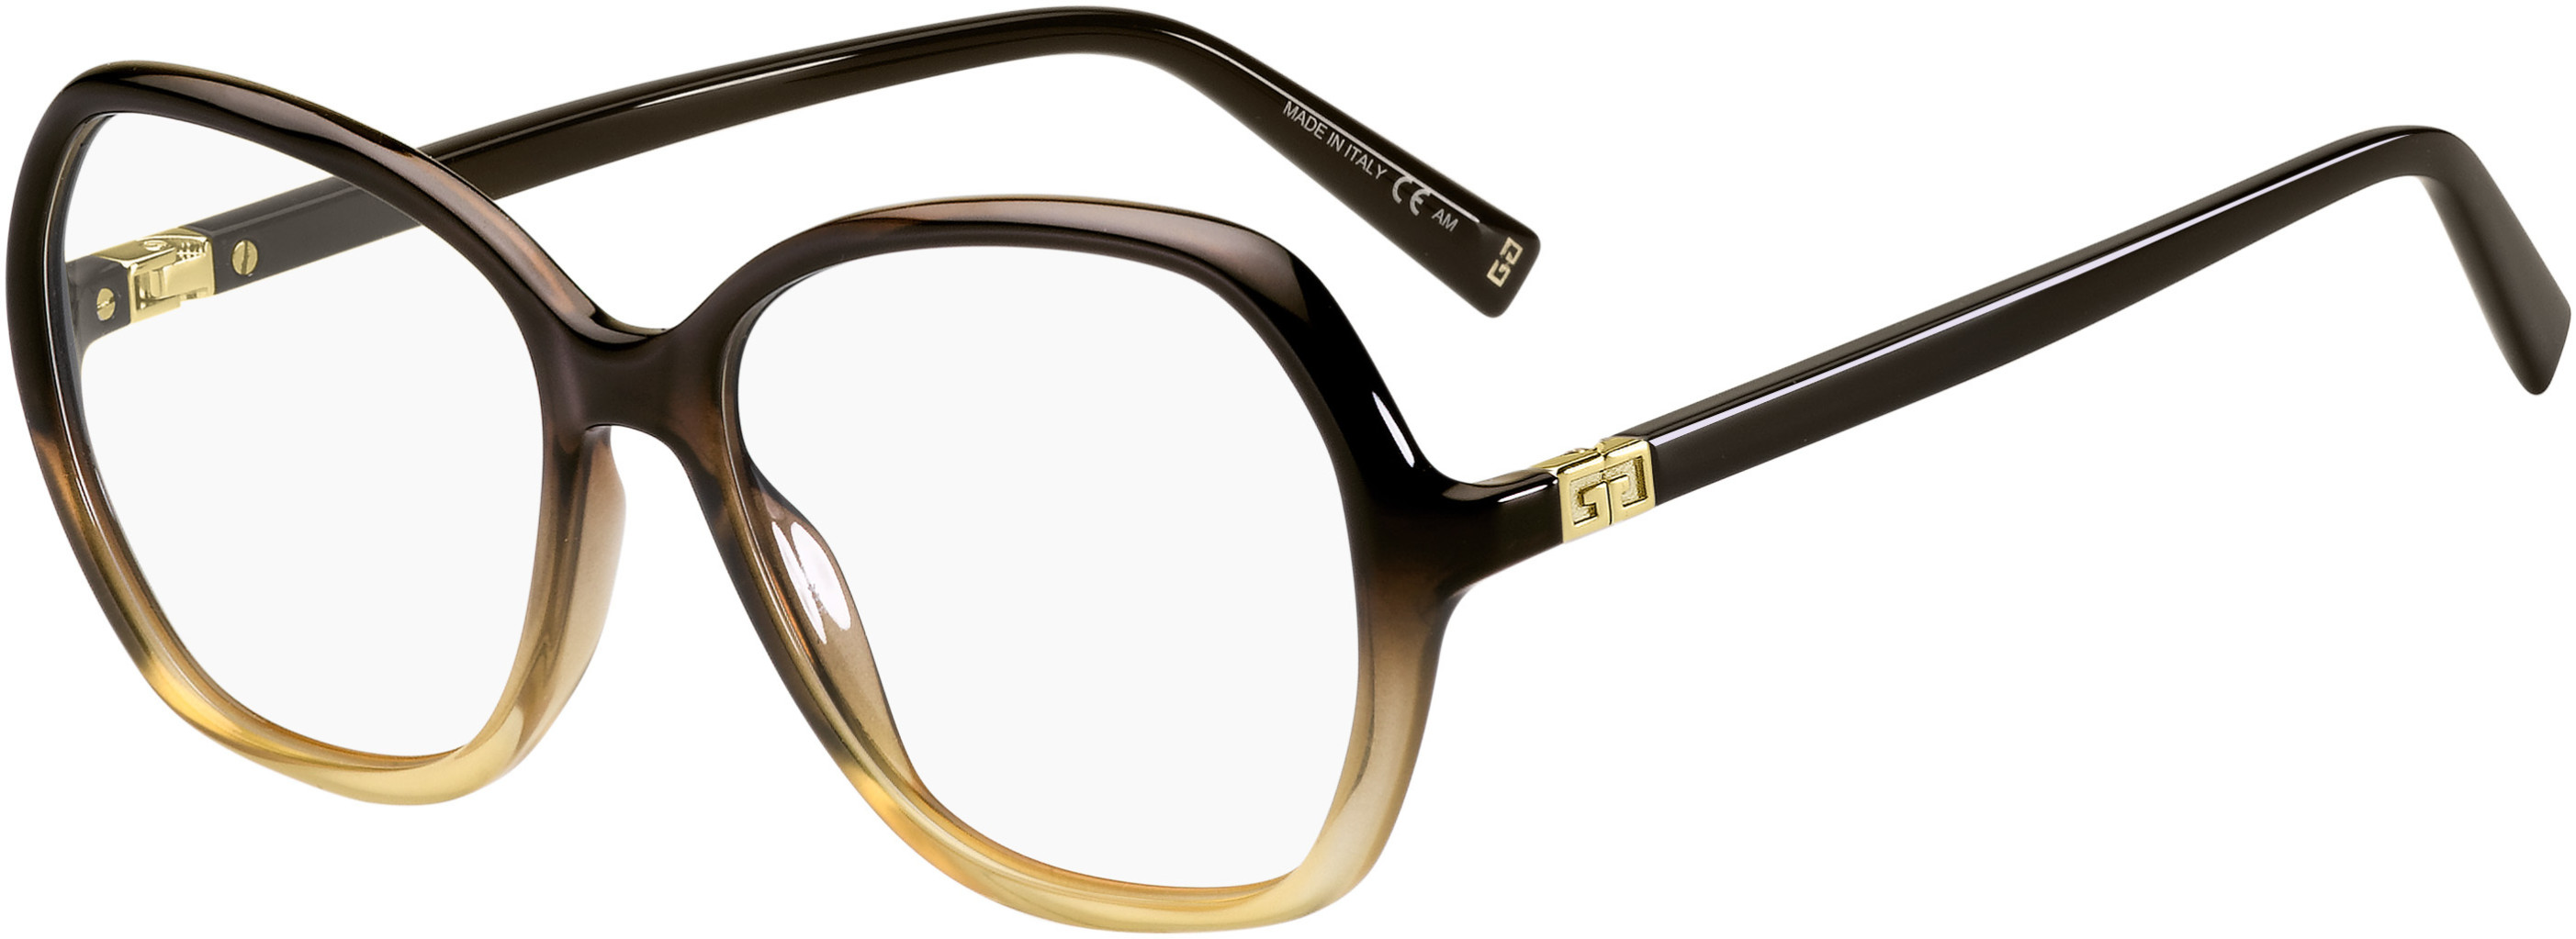 GIVENCHY 0141 GLN